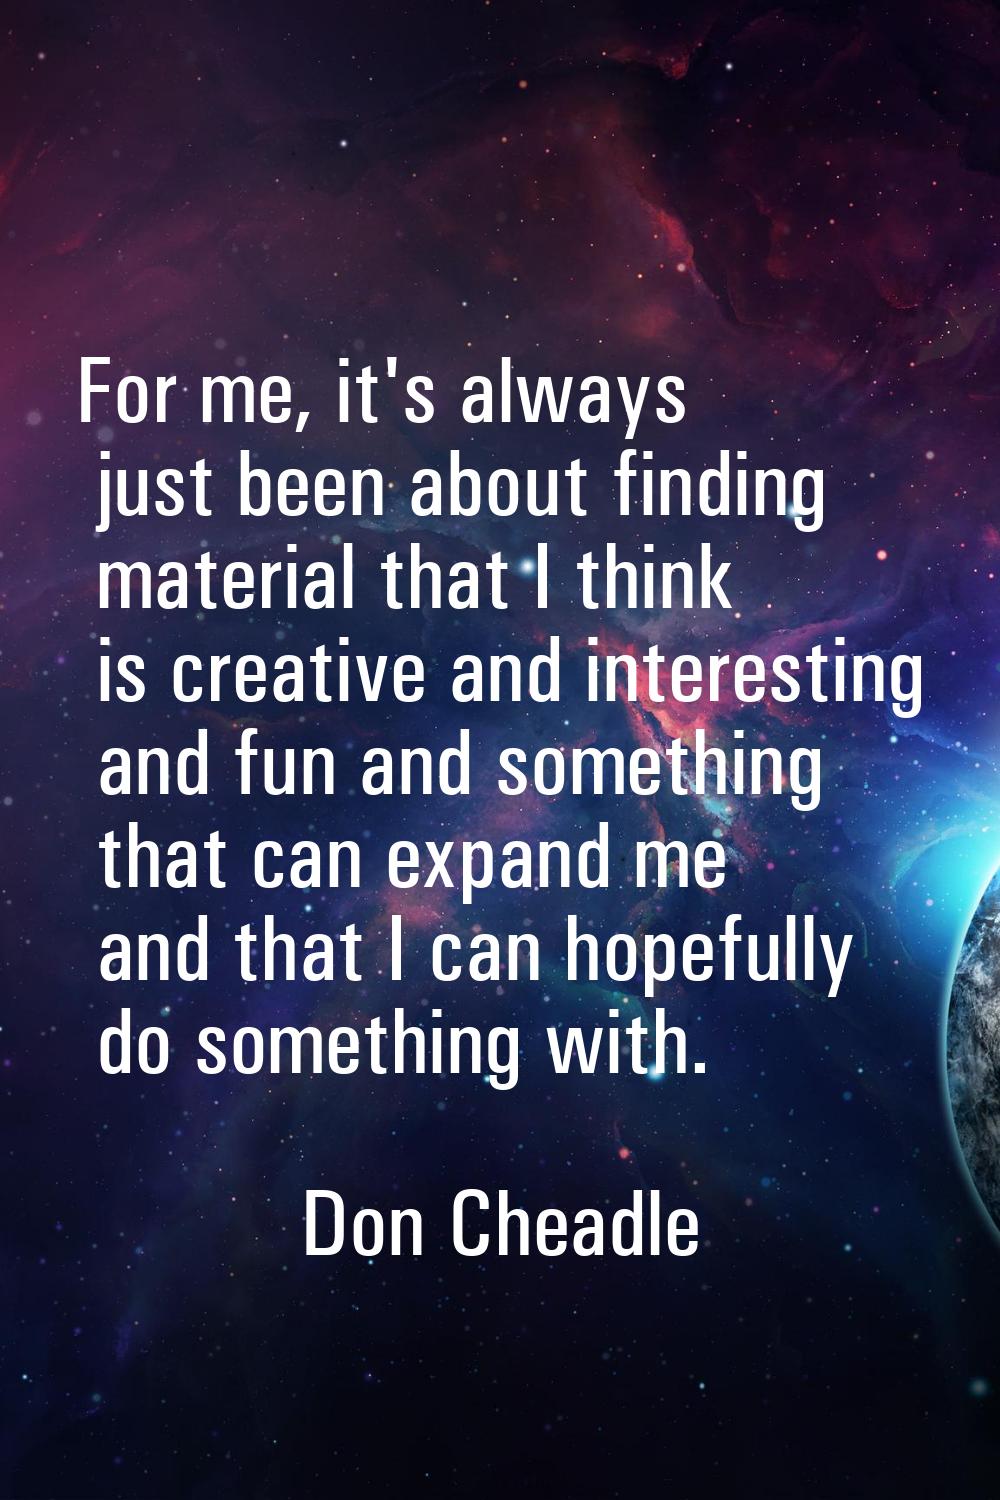 For me, it's always just been about finding material that I think is creative and interesting and f